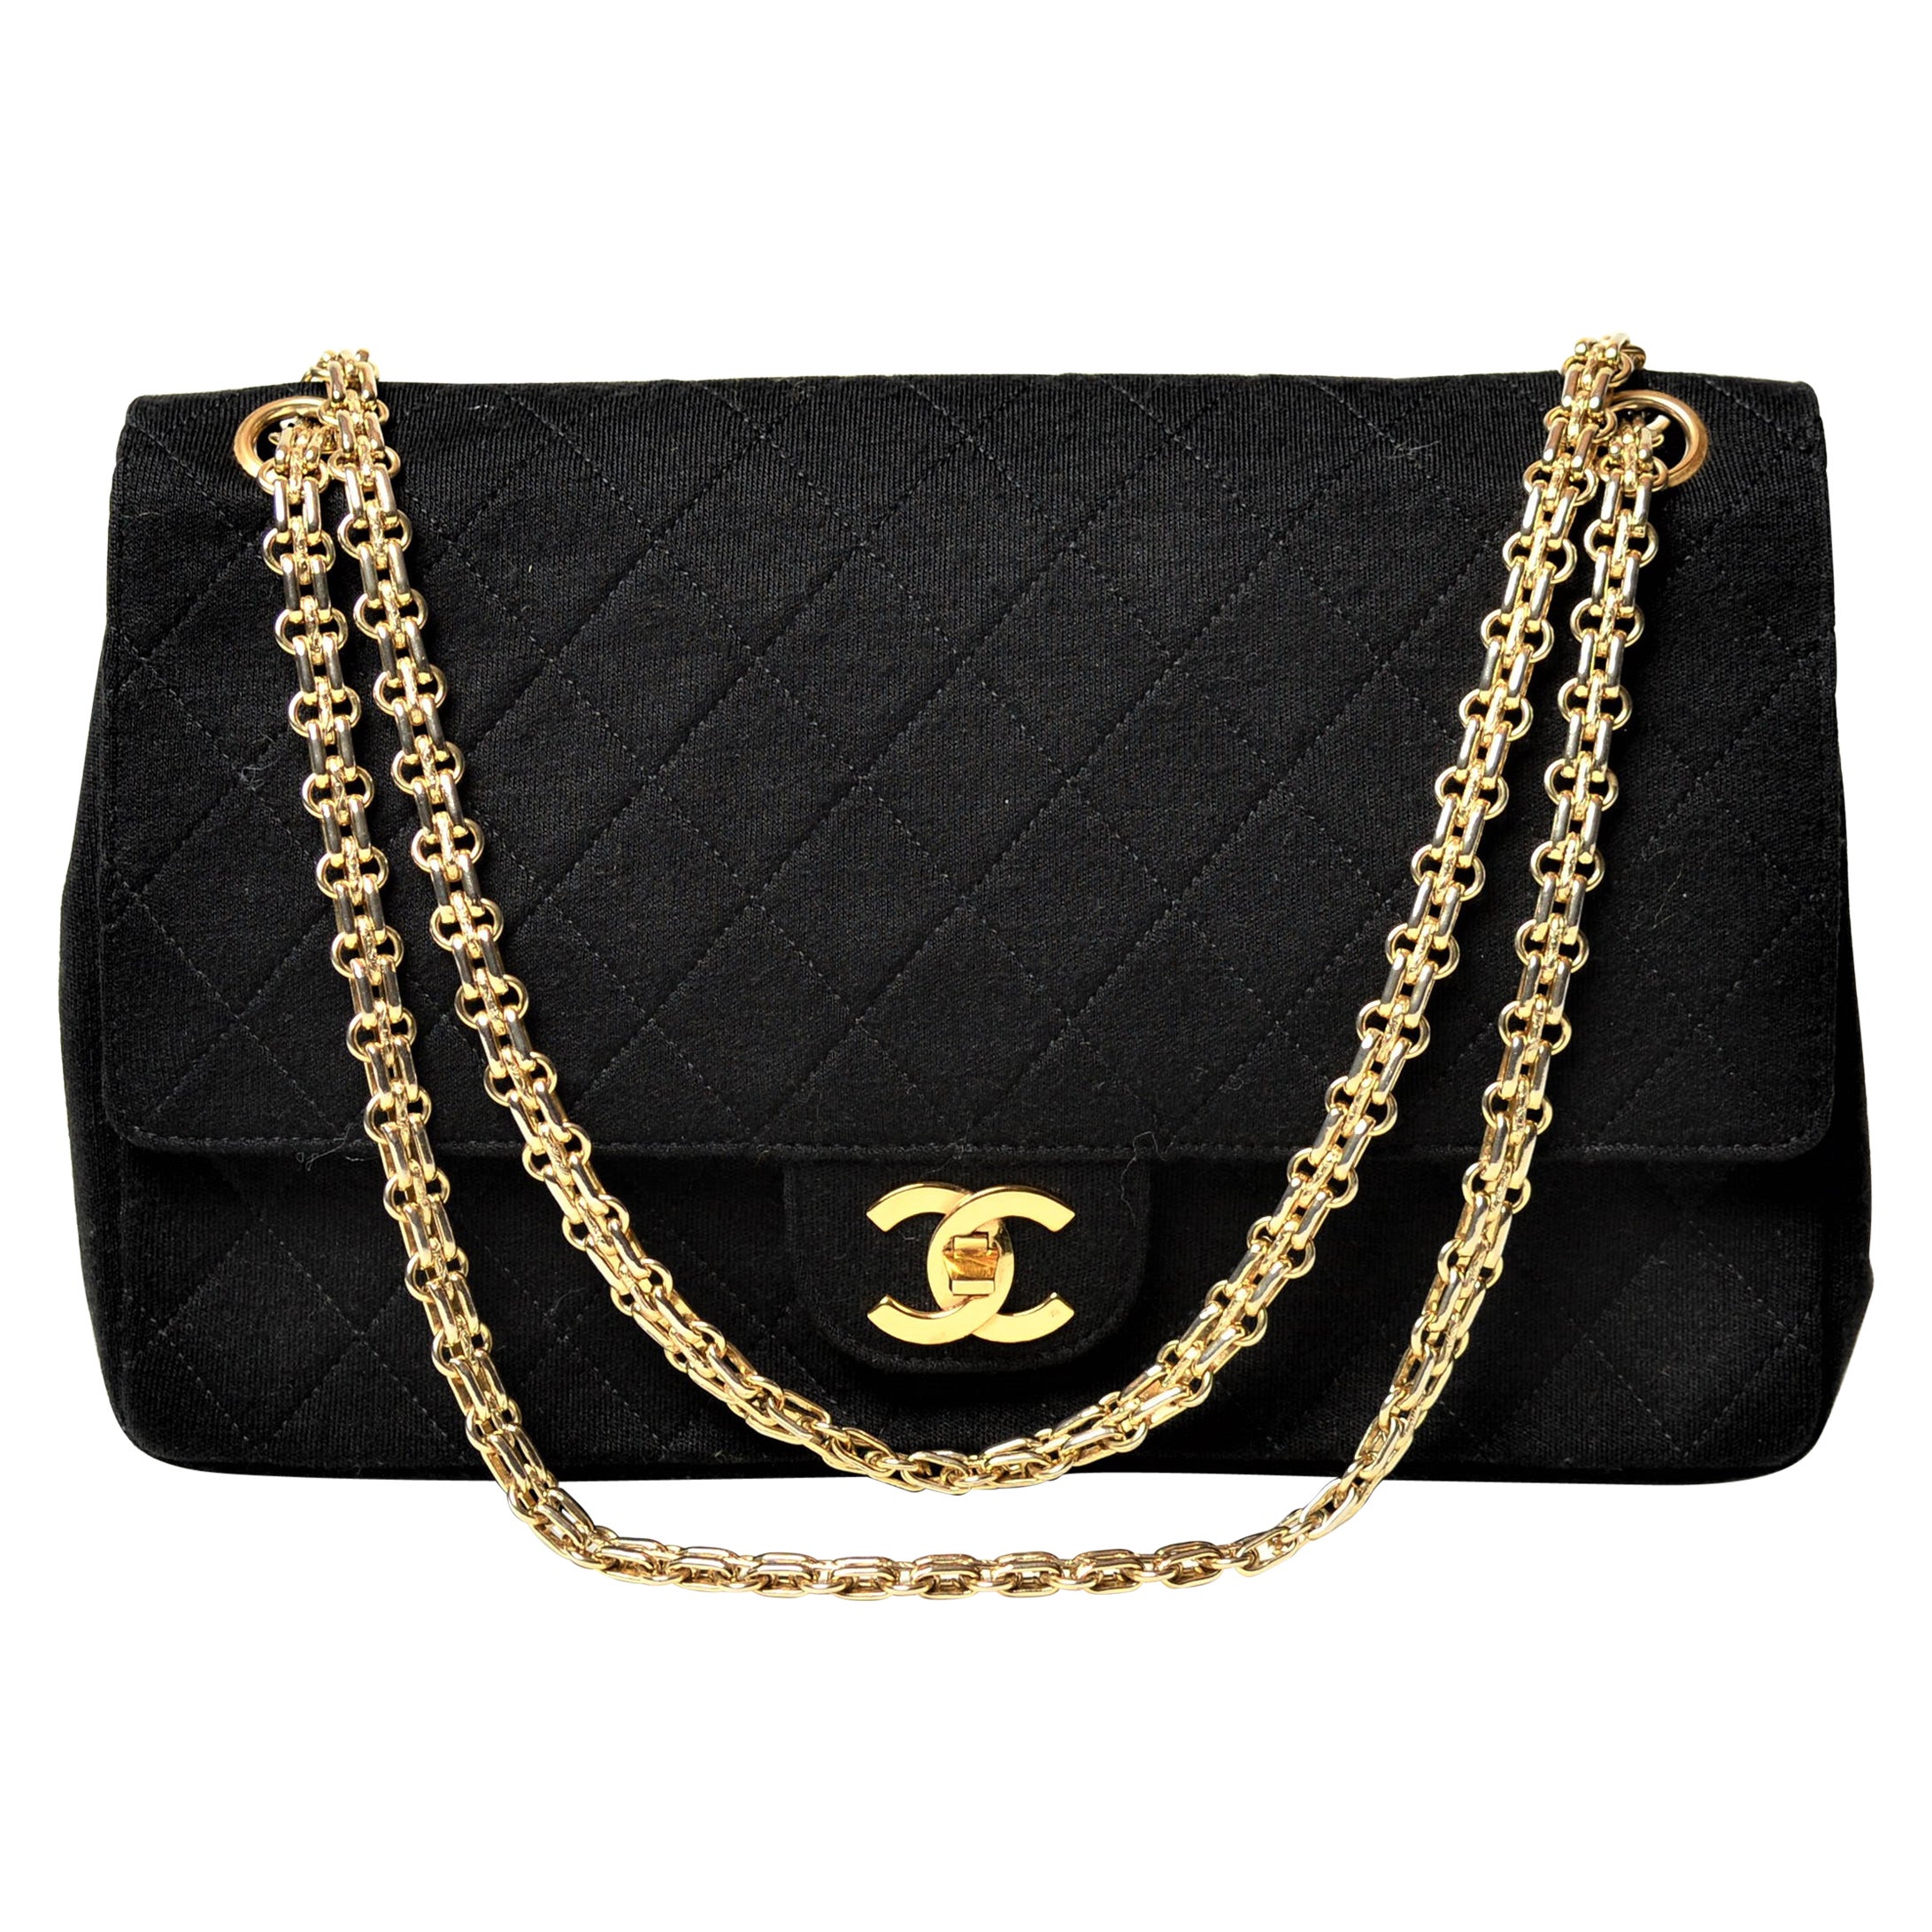 Chanel Classic Flap Jersey 2.55 Vintage Reissue Chain